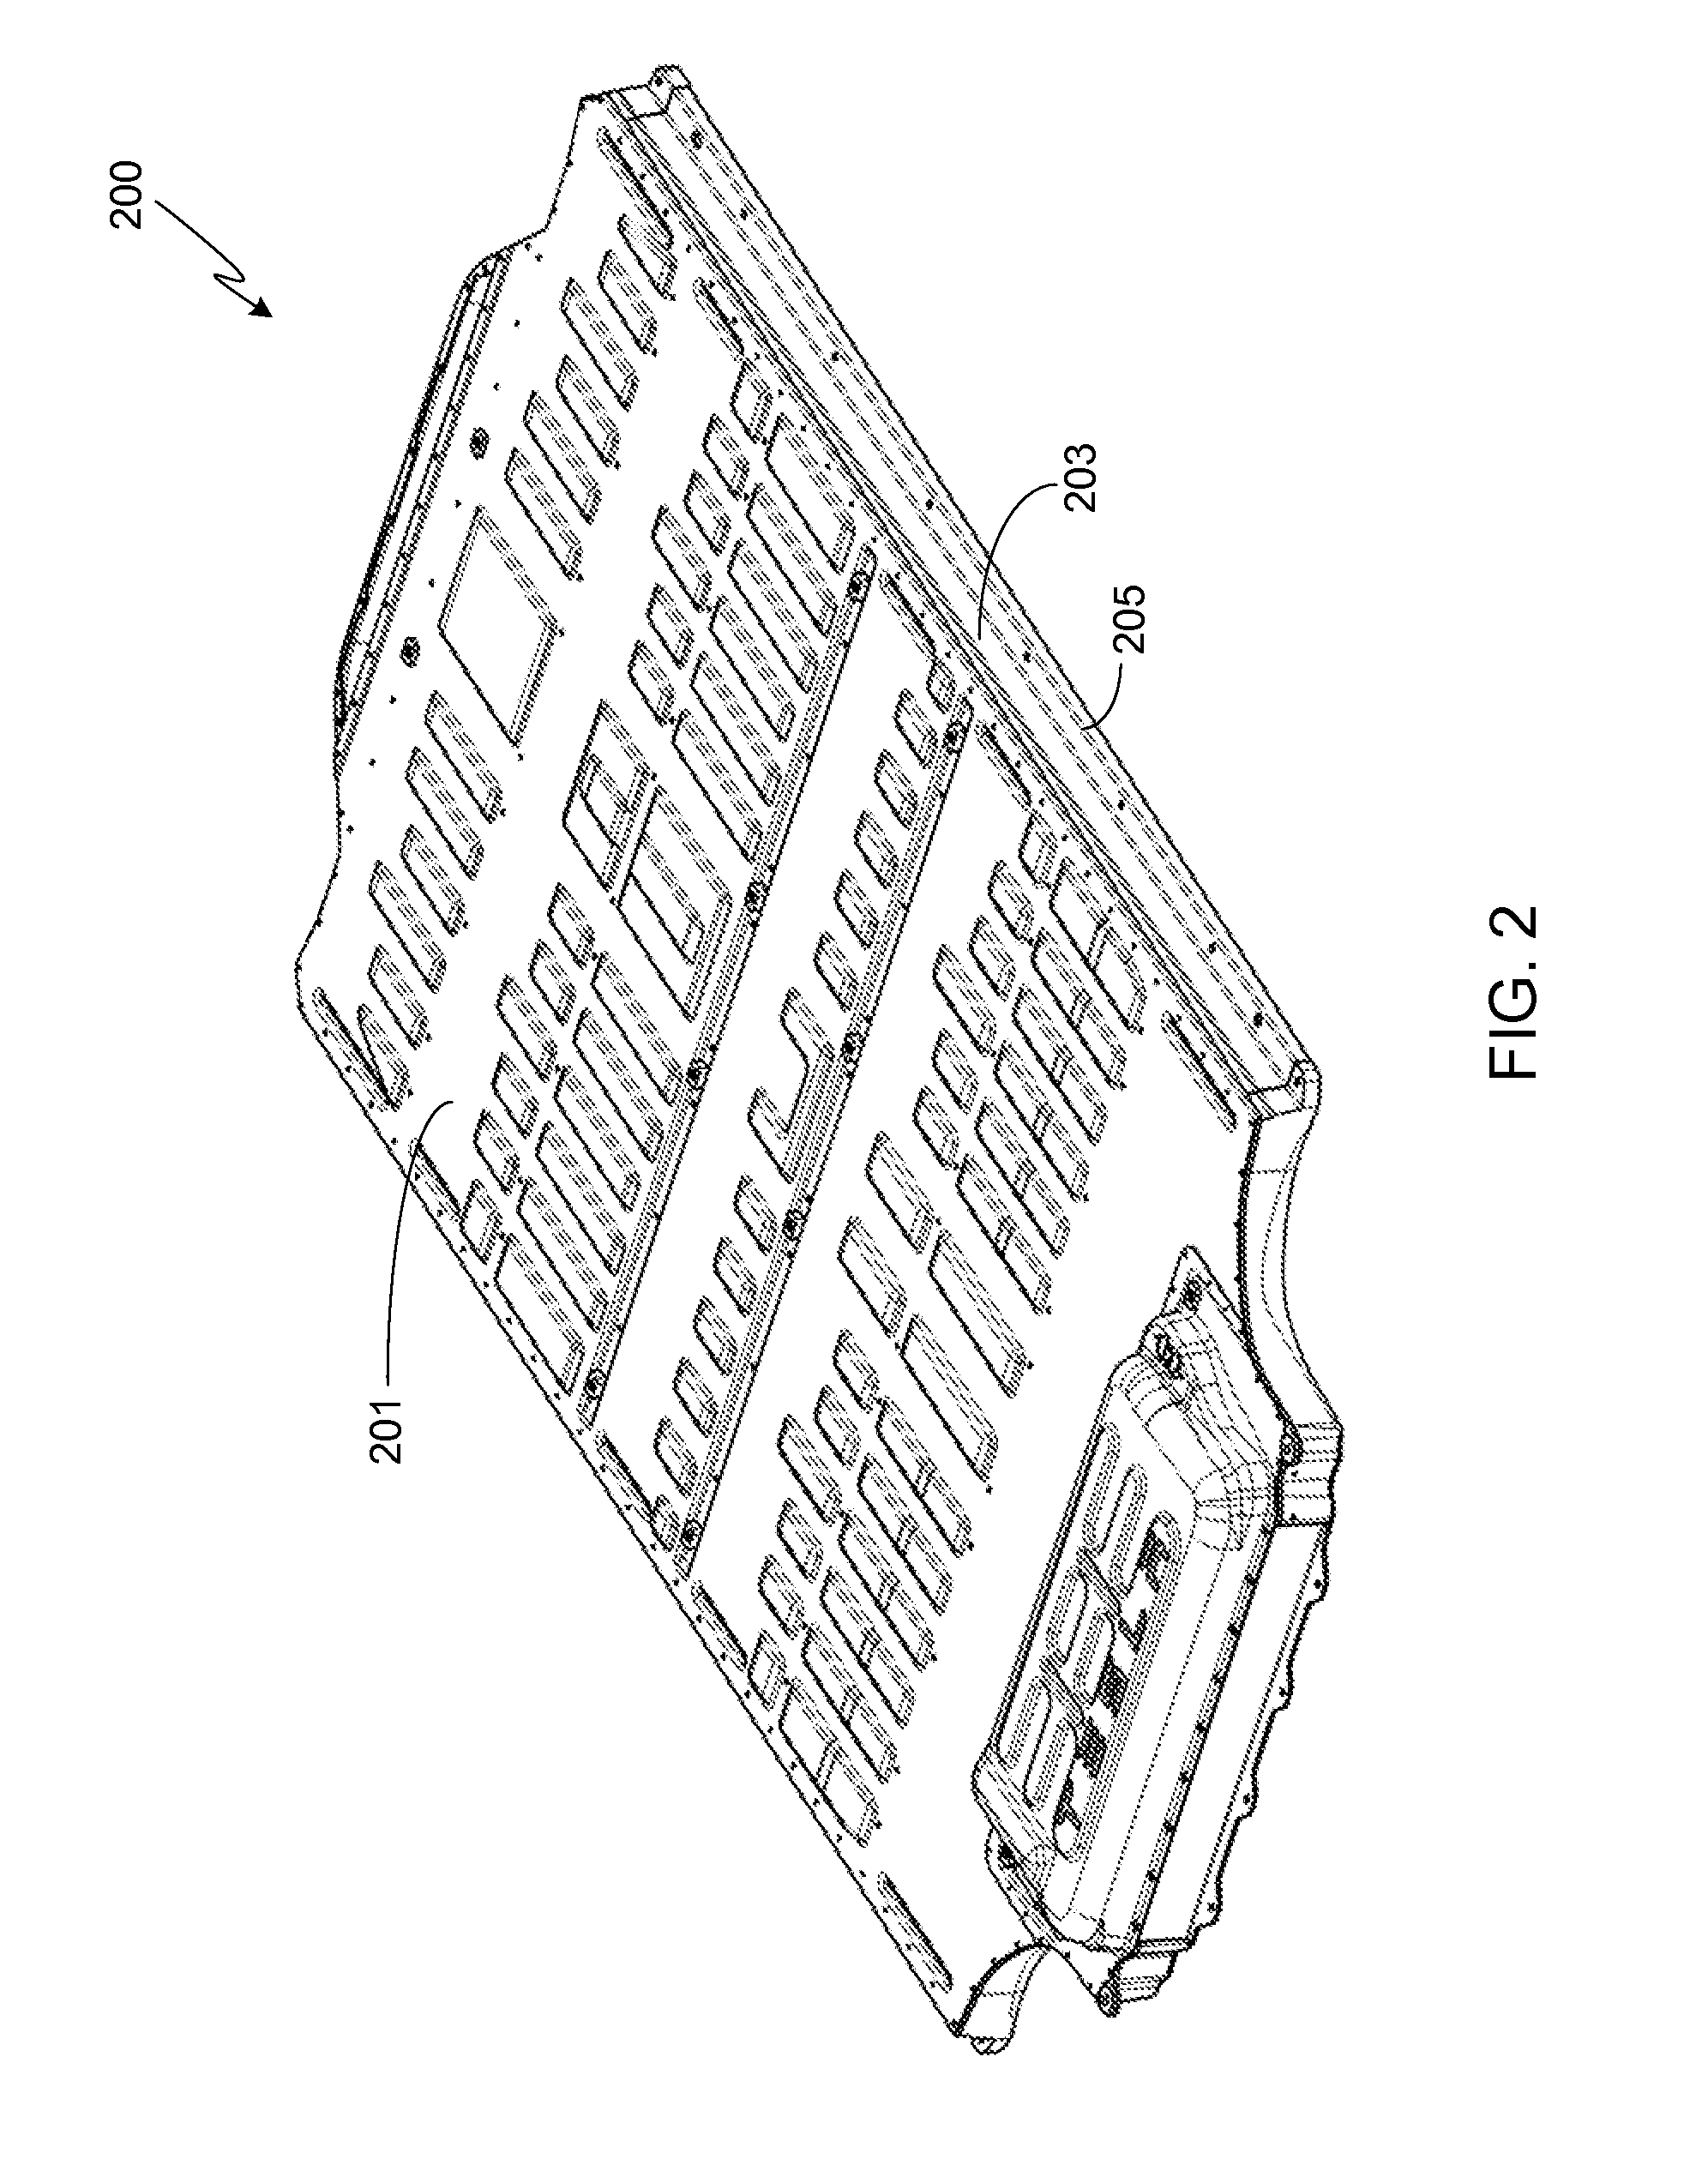 Battery Pack Directed Venting System